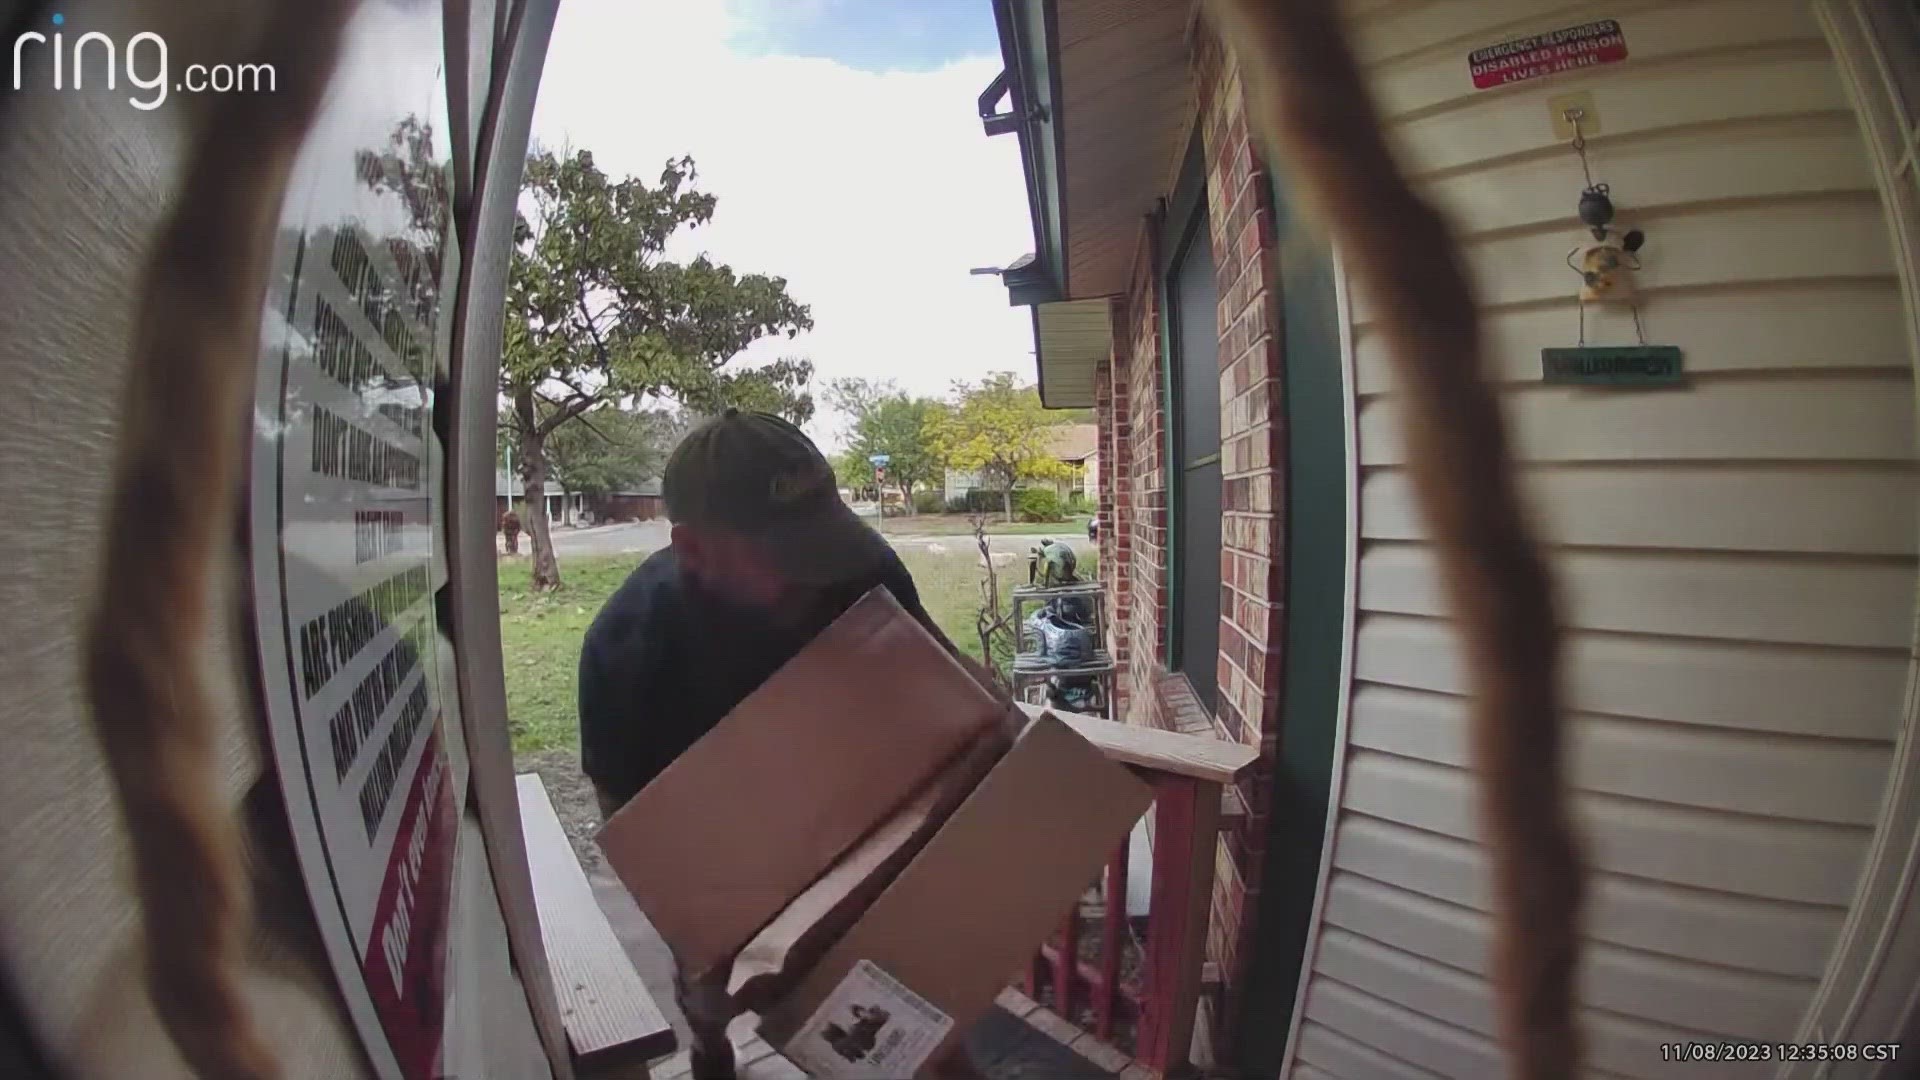 gave Ring doorbell videos to US police 11 times without